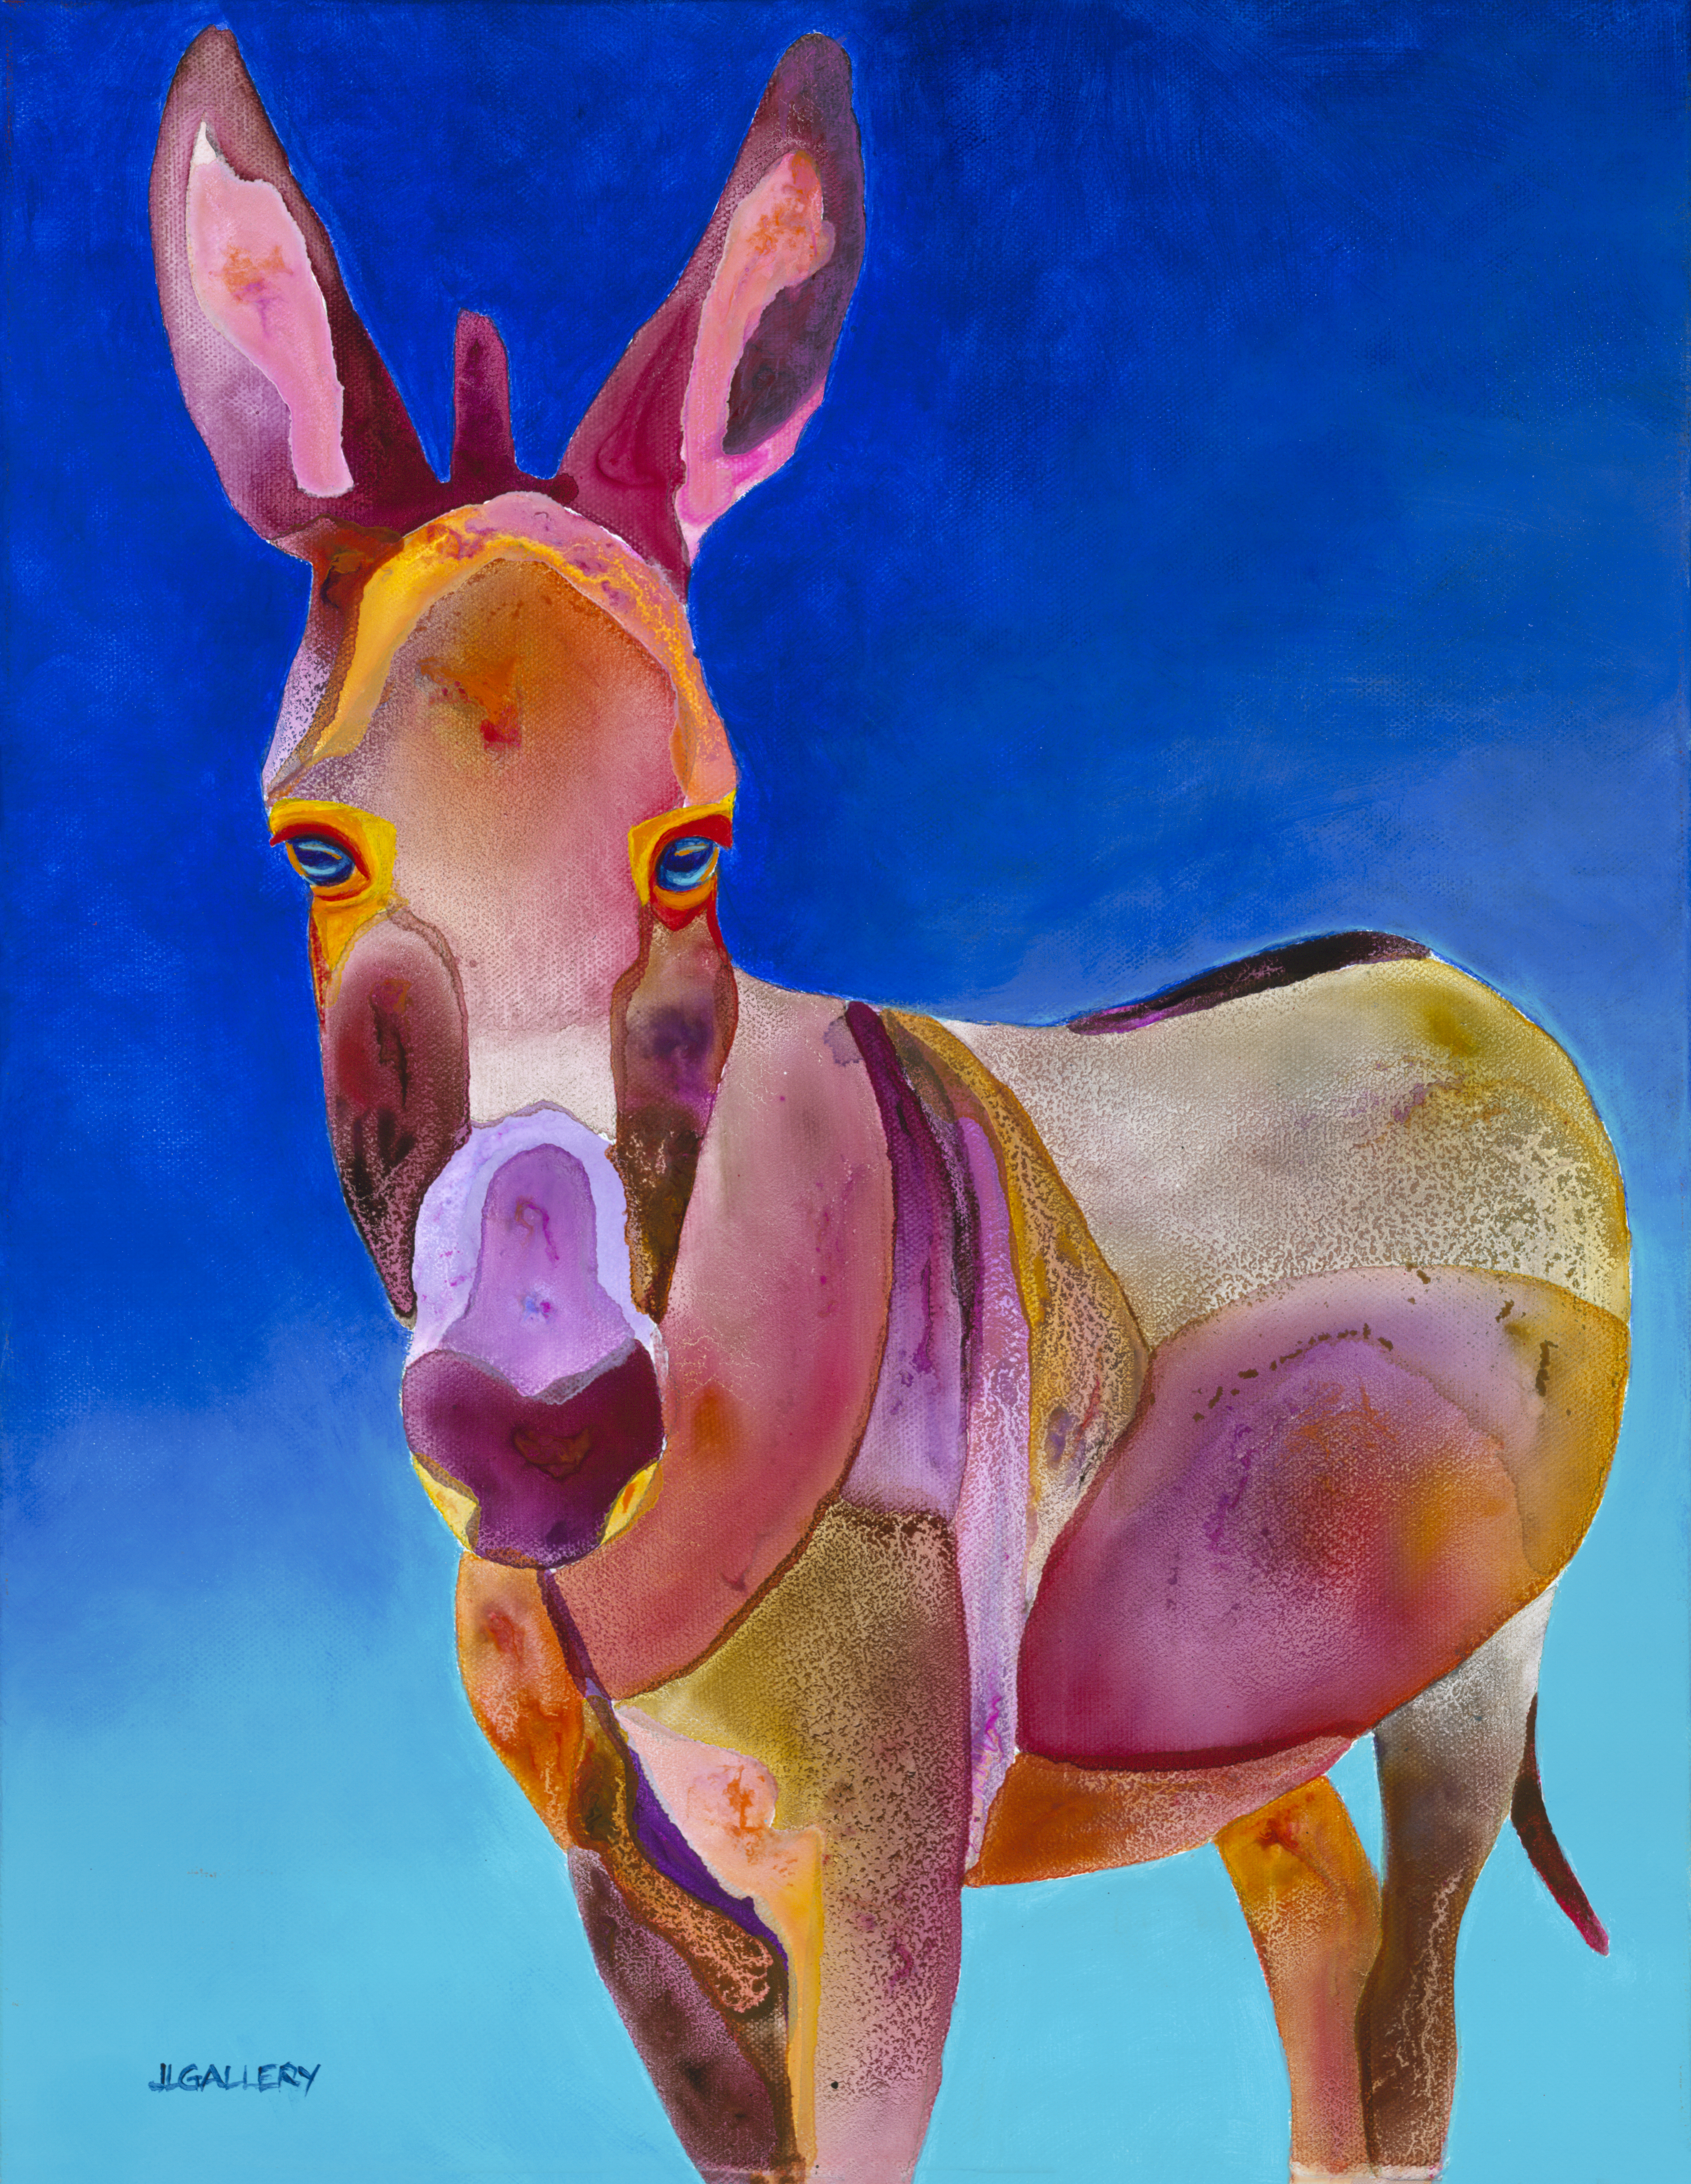 Tim a painting of a donkey on canvas. Mainly red with a blue background